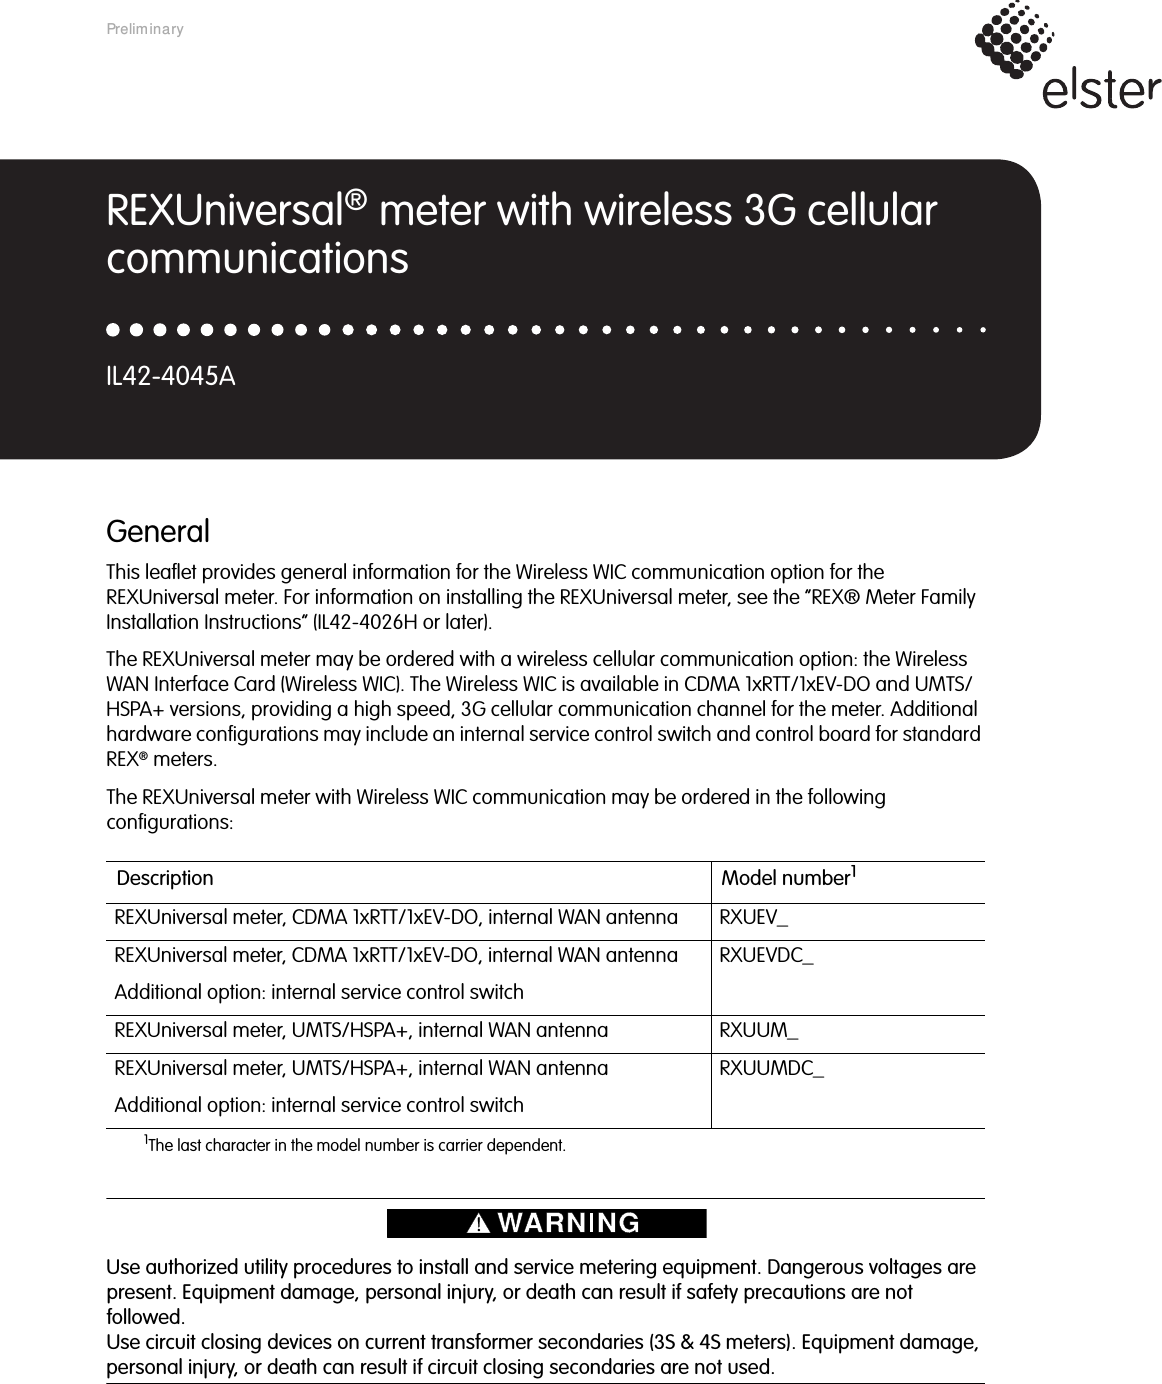 GeneralThis leaflet provides general information for the Wireless WIC communication option for the REXUniversal meter. For information on installing the REXUniversal meter, see the “REX® Meter Family Installation Instructions” (IL42-4026H or later).The REXUniversal meter may be ordered with a wireless cellular communication option: the Wireless WAN Interface Card (Wireless WIC). The Wireless WIC is available in CDMA 1xRTT/1xEV-DO and UMTS/HSPA+ versions, providing a high speed, 3G cellular communication channel for the meter. Additional hardware configurations may include an internal service control switch and control board for standard REX® meters.The REXUniversal meter with Wireless WIC communication may be ordered in the following configurations: Use authorized utility procedures to install and service metering equipment. Dangerous voltages are present. Equipment damage, personal injury, or death can result if safety precautions are not followed.Use circuit closing devices on current transformer secondaries (3S &amp; 4S meters). Equipment damage, personal injury, or death can result if circuit closing secondaries are not used.Description Model number11The last character in the model number is carrier dependent.REXUniversal meter, CDMA 1xRTT/1xEV-DO, internal WAN antenna RXUEV_REXUniversal meter, CDMA 1xRTT/1xEV-DO, internal WAN antennaAdditional option: internal service control switchRXUEVDC_REXUniversal meter, UMTS/HSPA+, internal WAN antenna RXUUM_REXUniversal meter, UMTS/HSPA+, internal WAN antennaAdditional option: internal service control switchRXUUMDC_REXUniversal® meter with wireless 3G cellular communicationsIL42-4045APreliminary